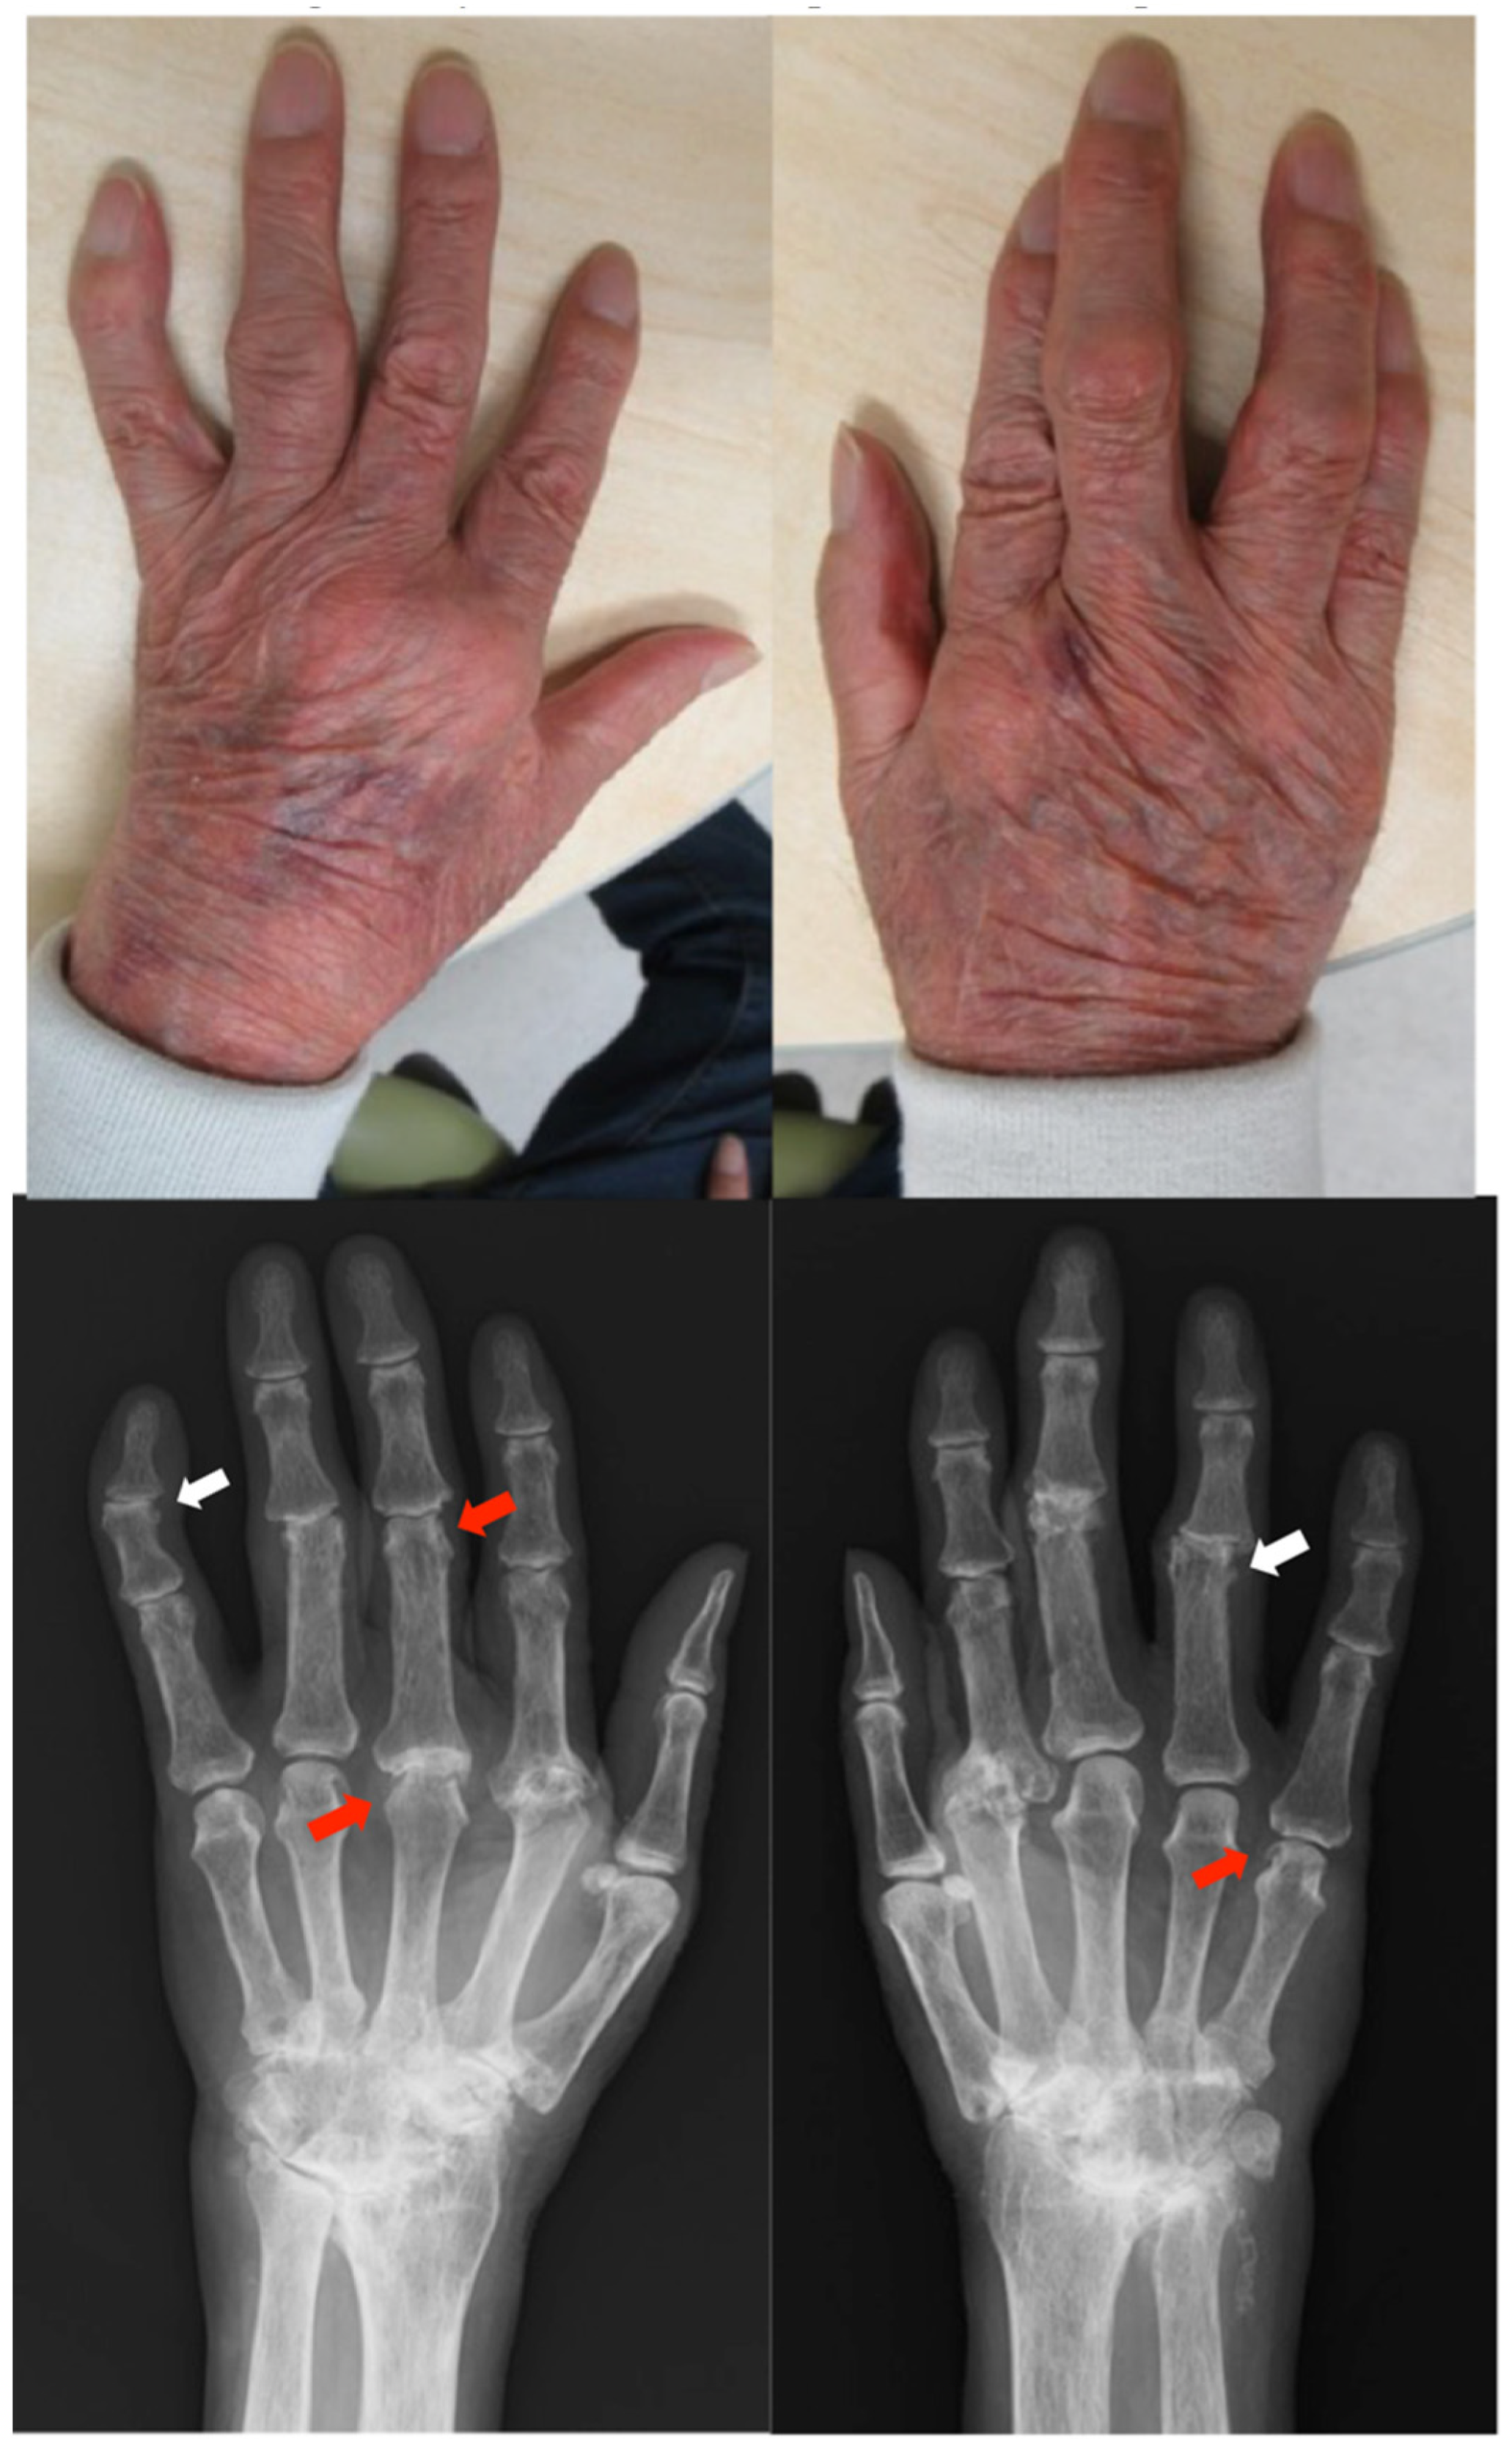 What is an effective and natural way to treat rheumatoid arthritis? - Quora